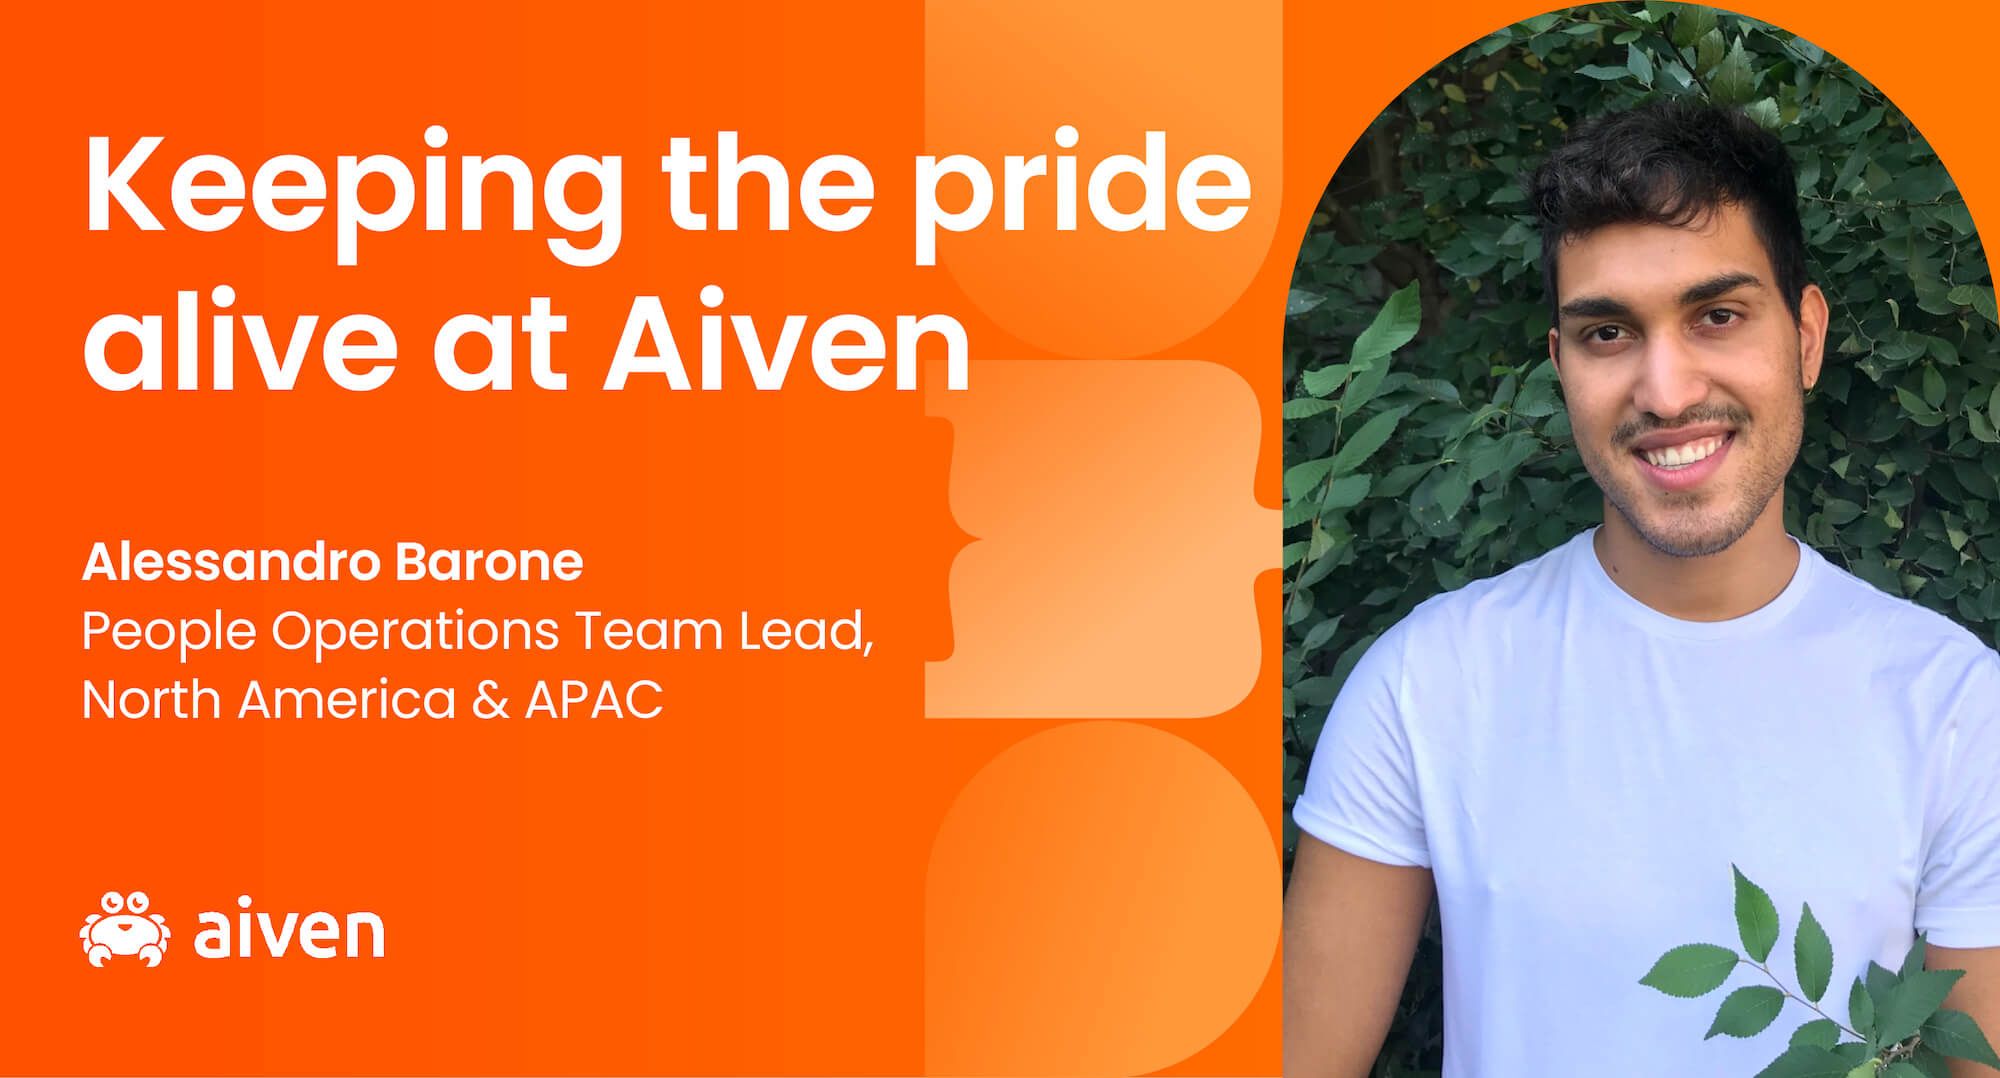 Keeping the pride alive at Aiven. A picture of Alessandro Barone, our People Operations Lead for North American and APAC. The cuddly Aiven crab logo is at the bottom left.